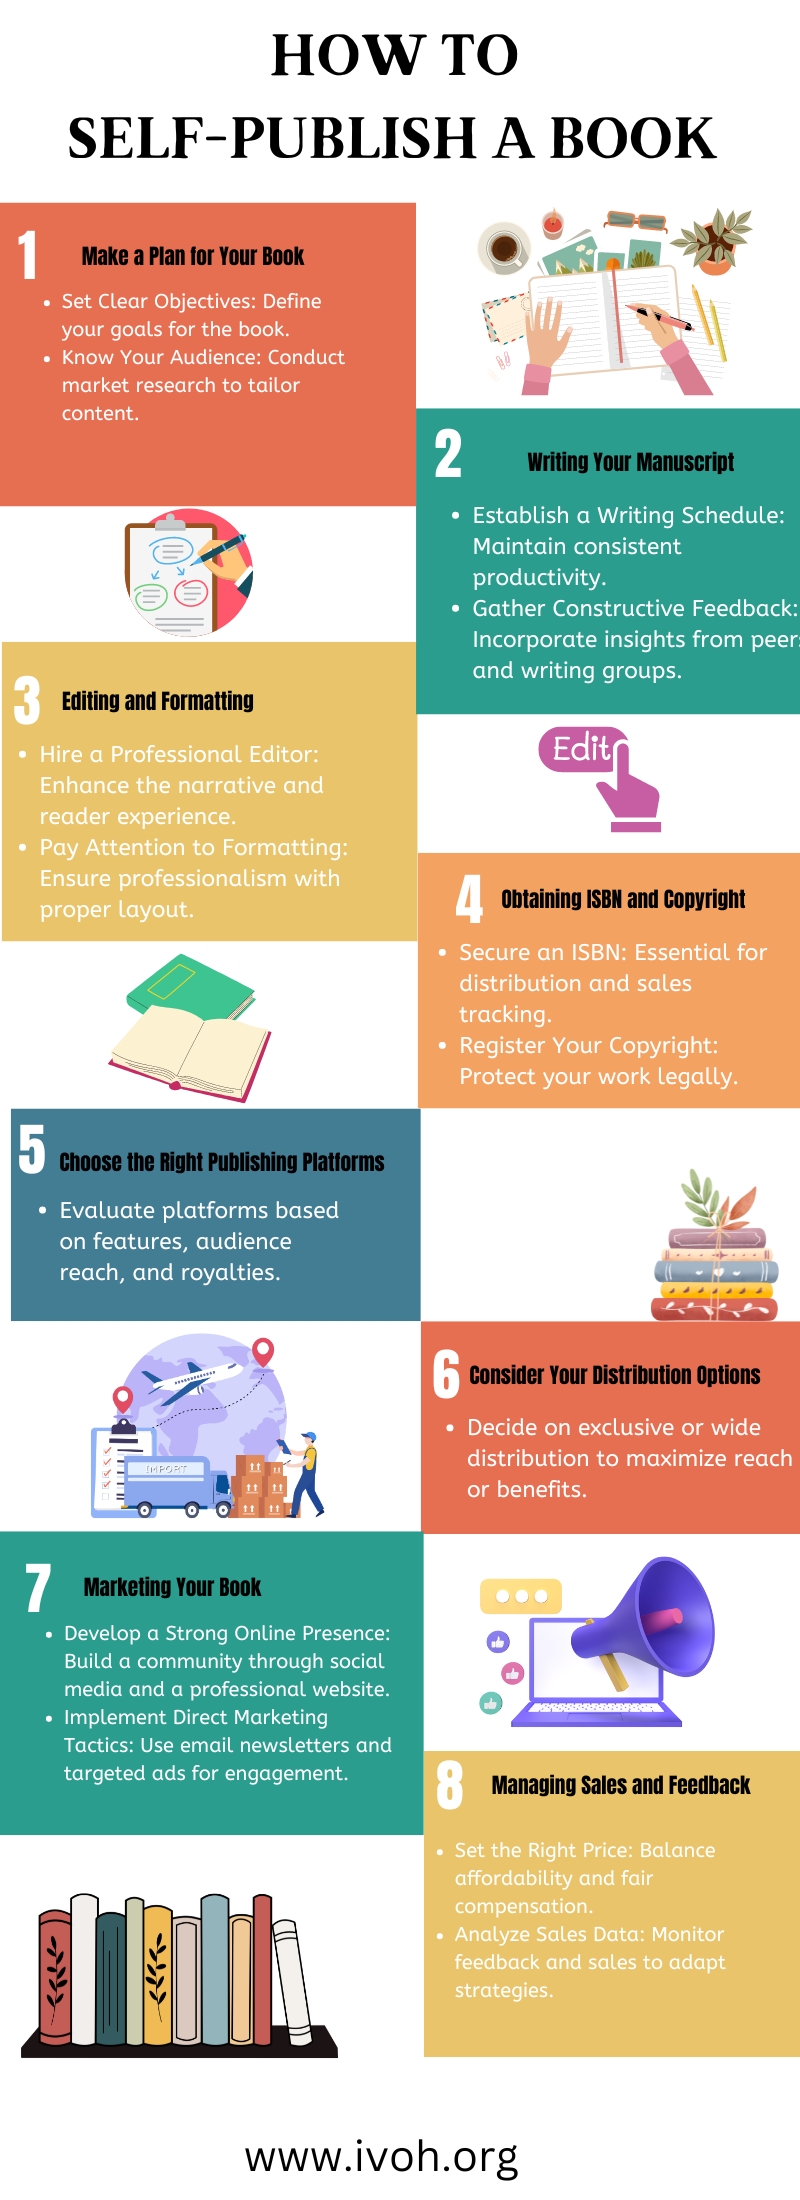 Self-Publish a Book infographic